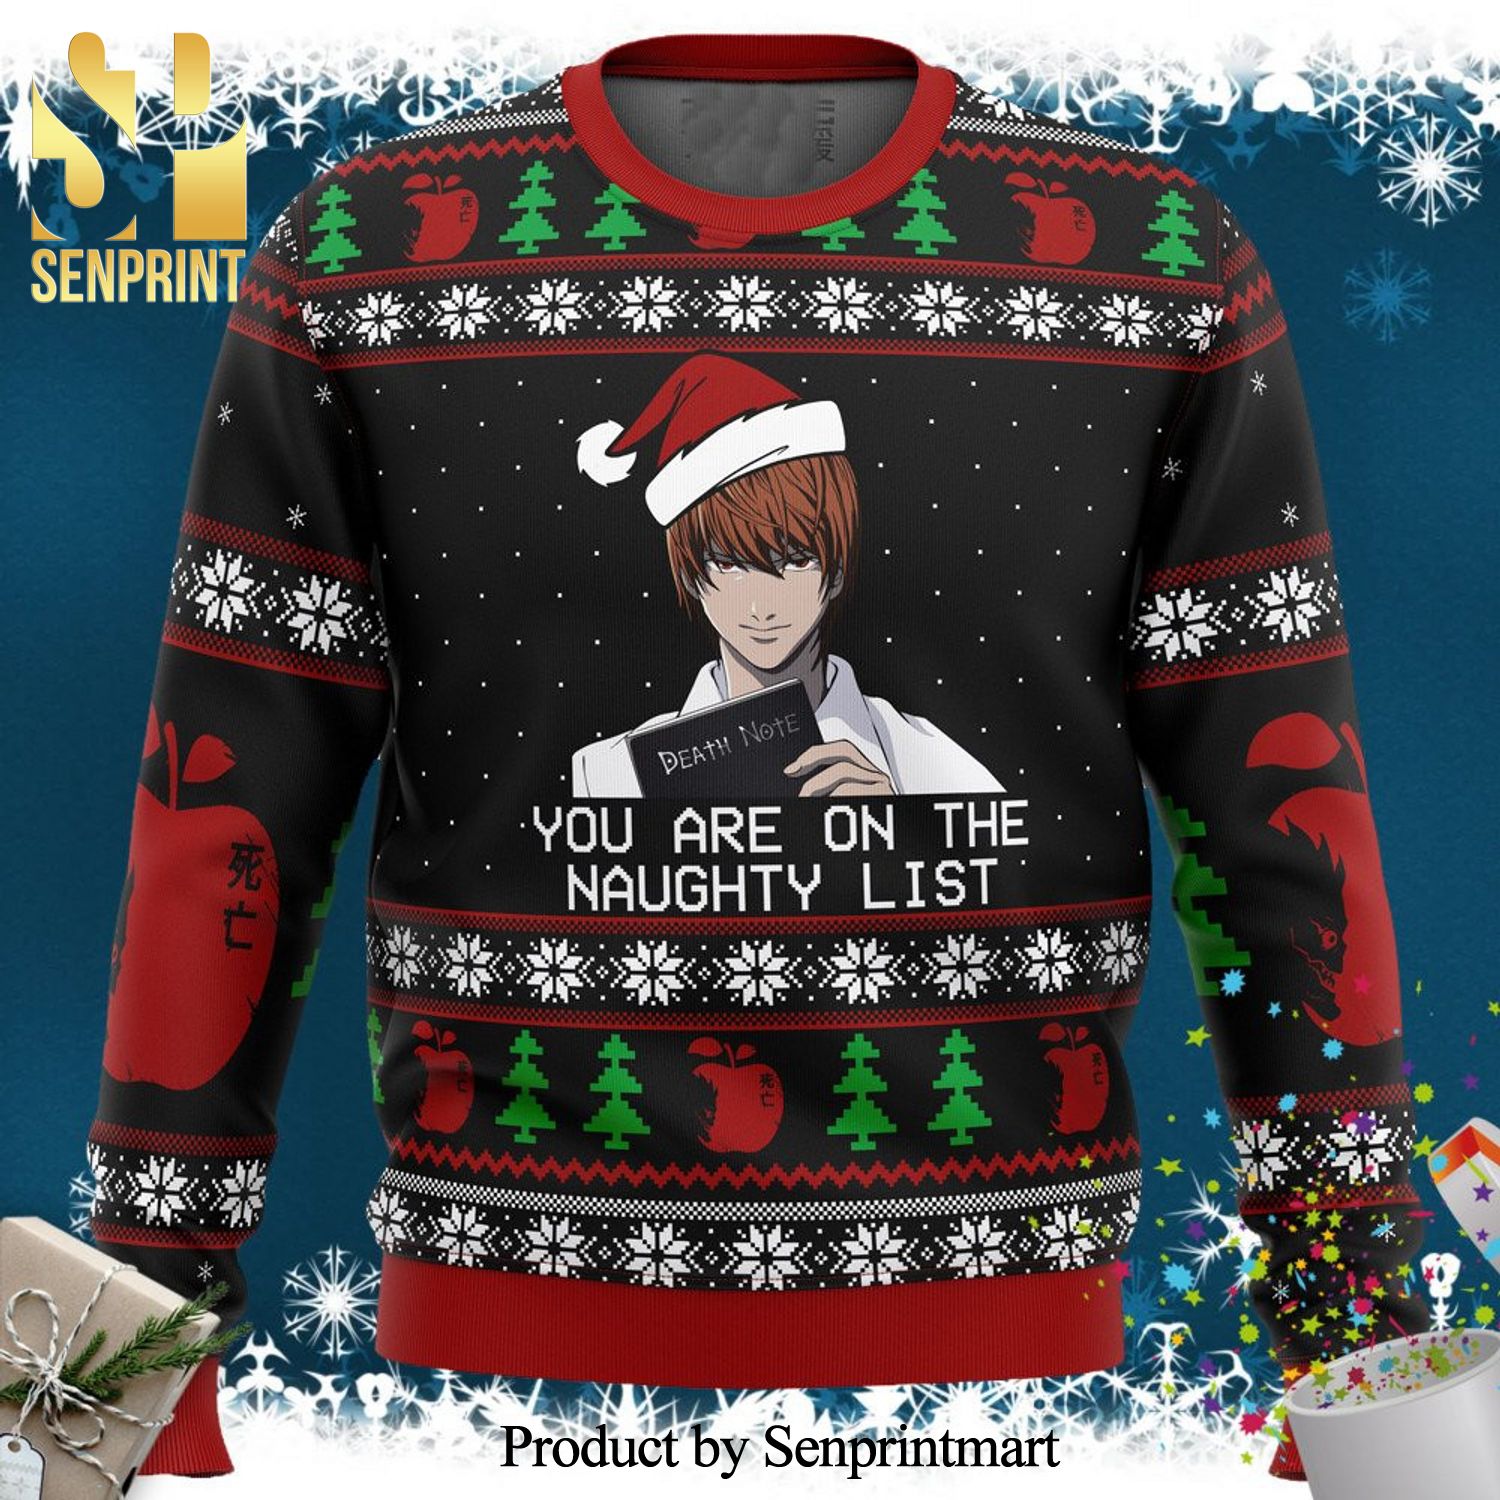 Light Yagami Death Note Naughty List Manga Anime Knitted Ugly Christmas Sweater